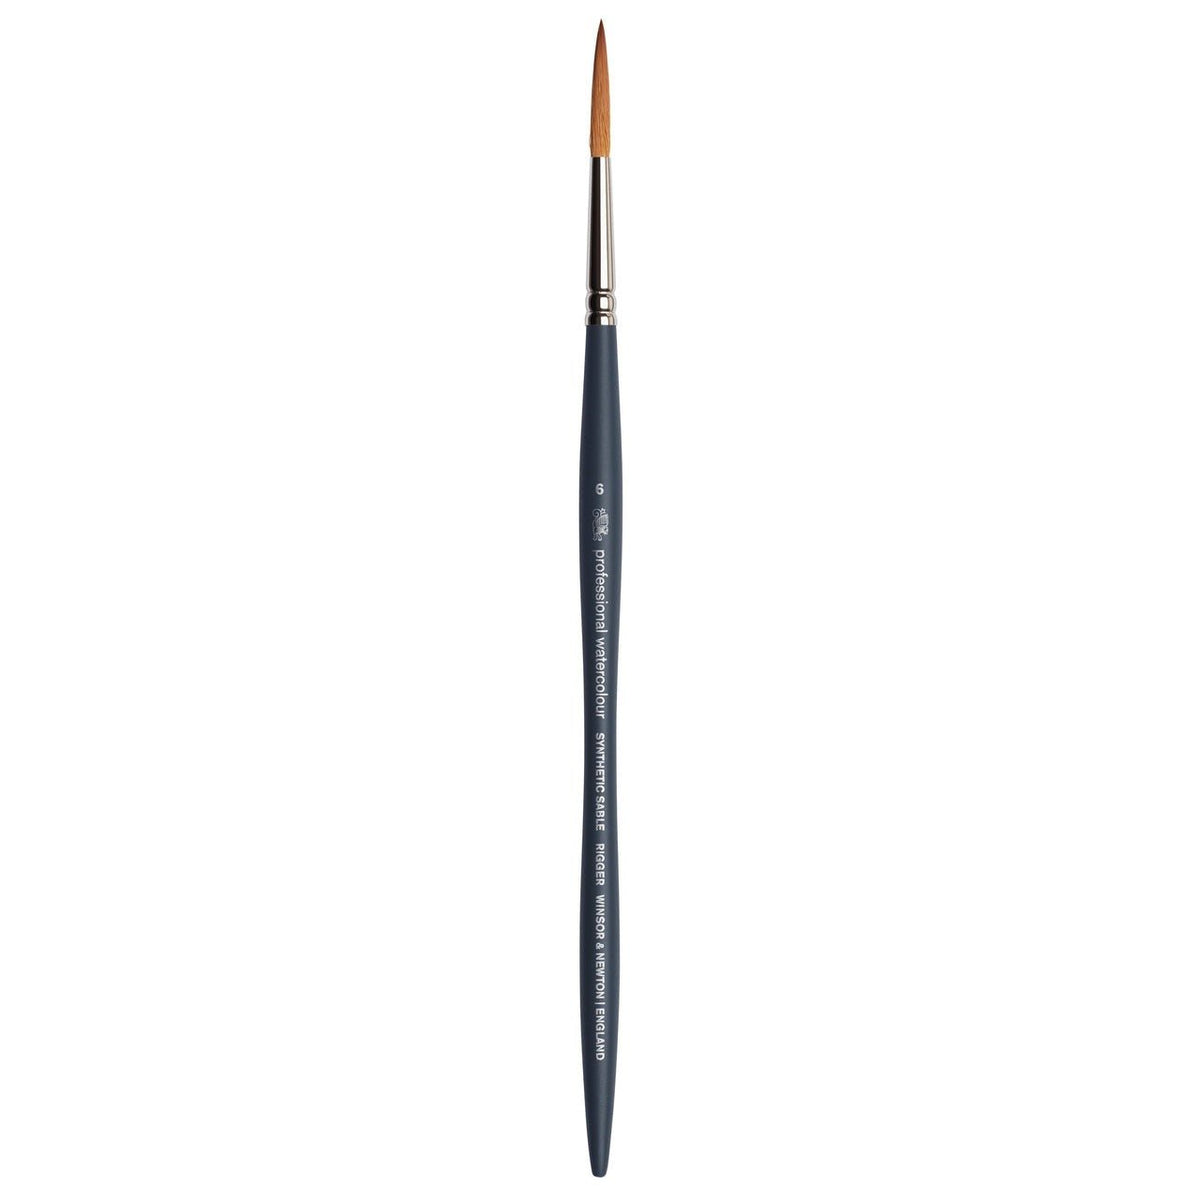 Winsor & Newton Professional Watercolor Synthetic Sable Brush